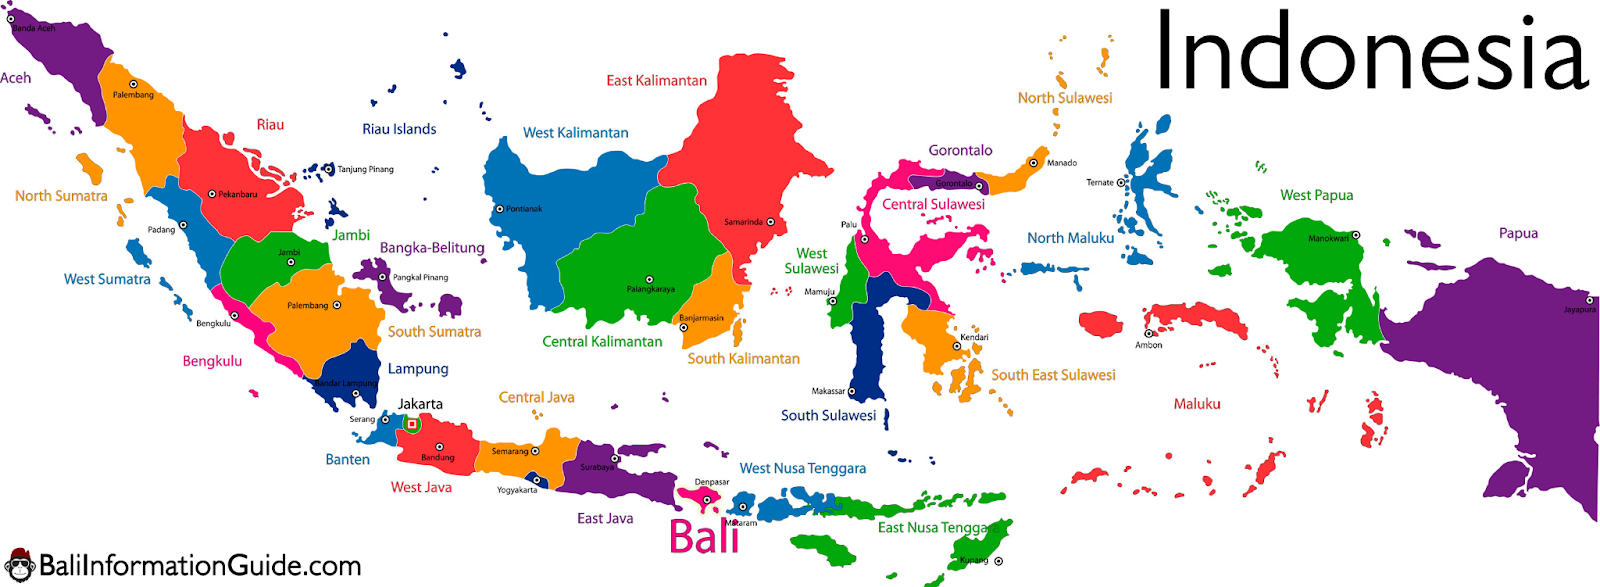 A map of Indonesia with some of its islands labelled